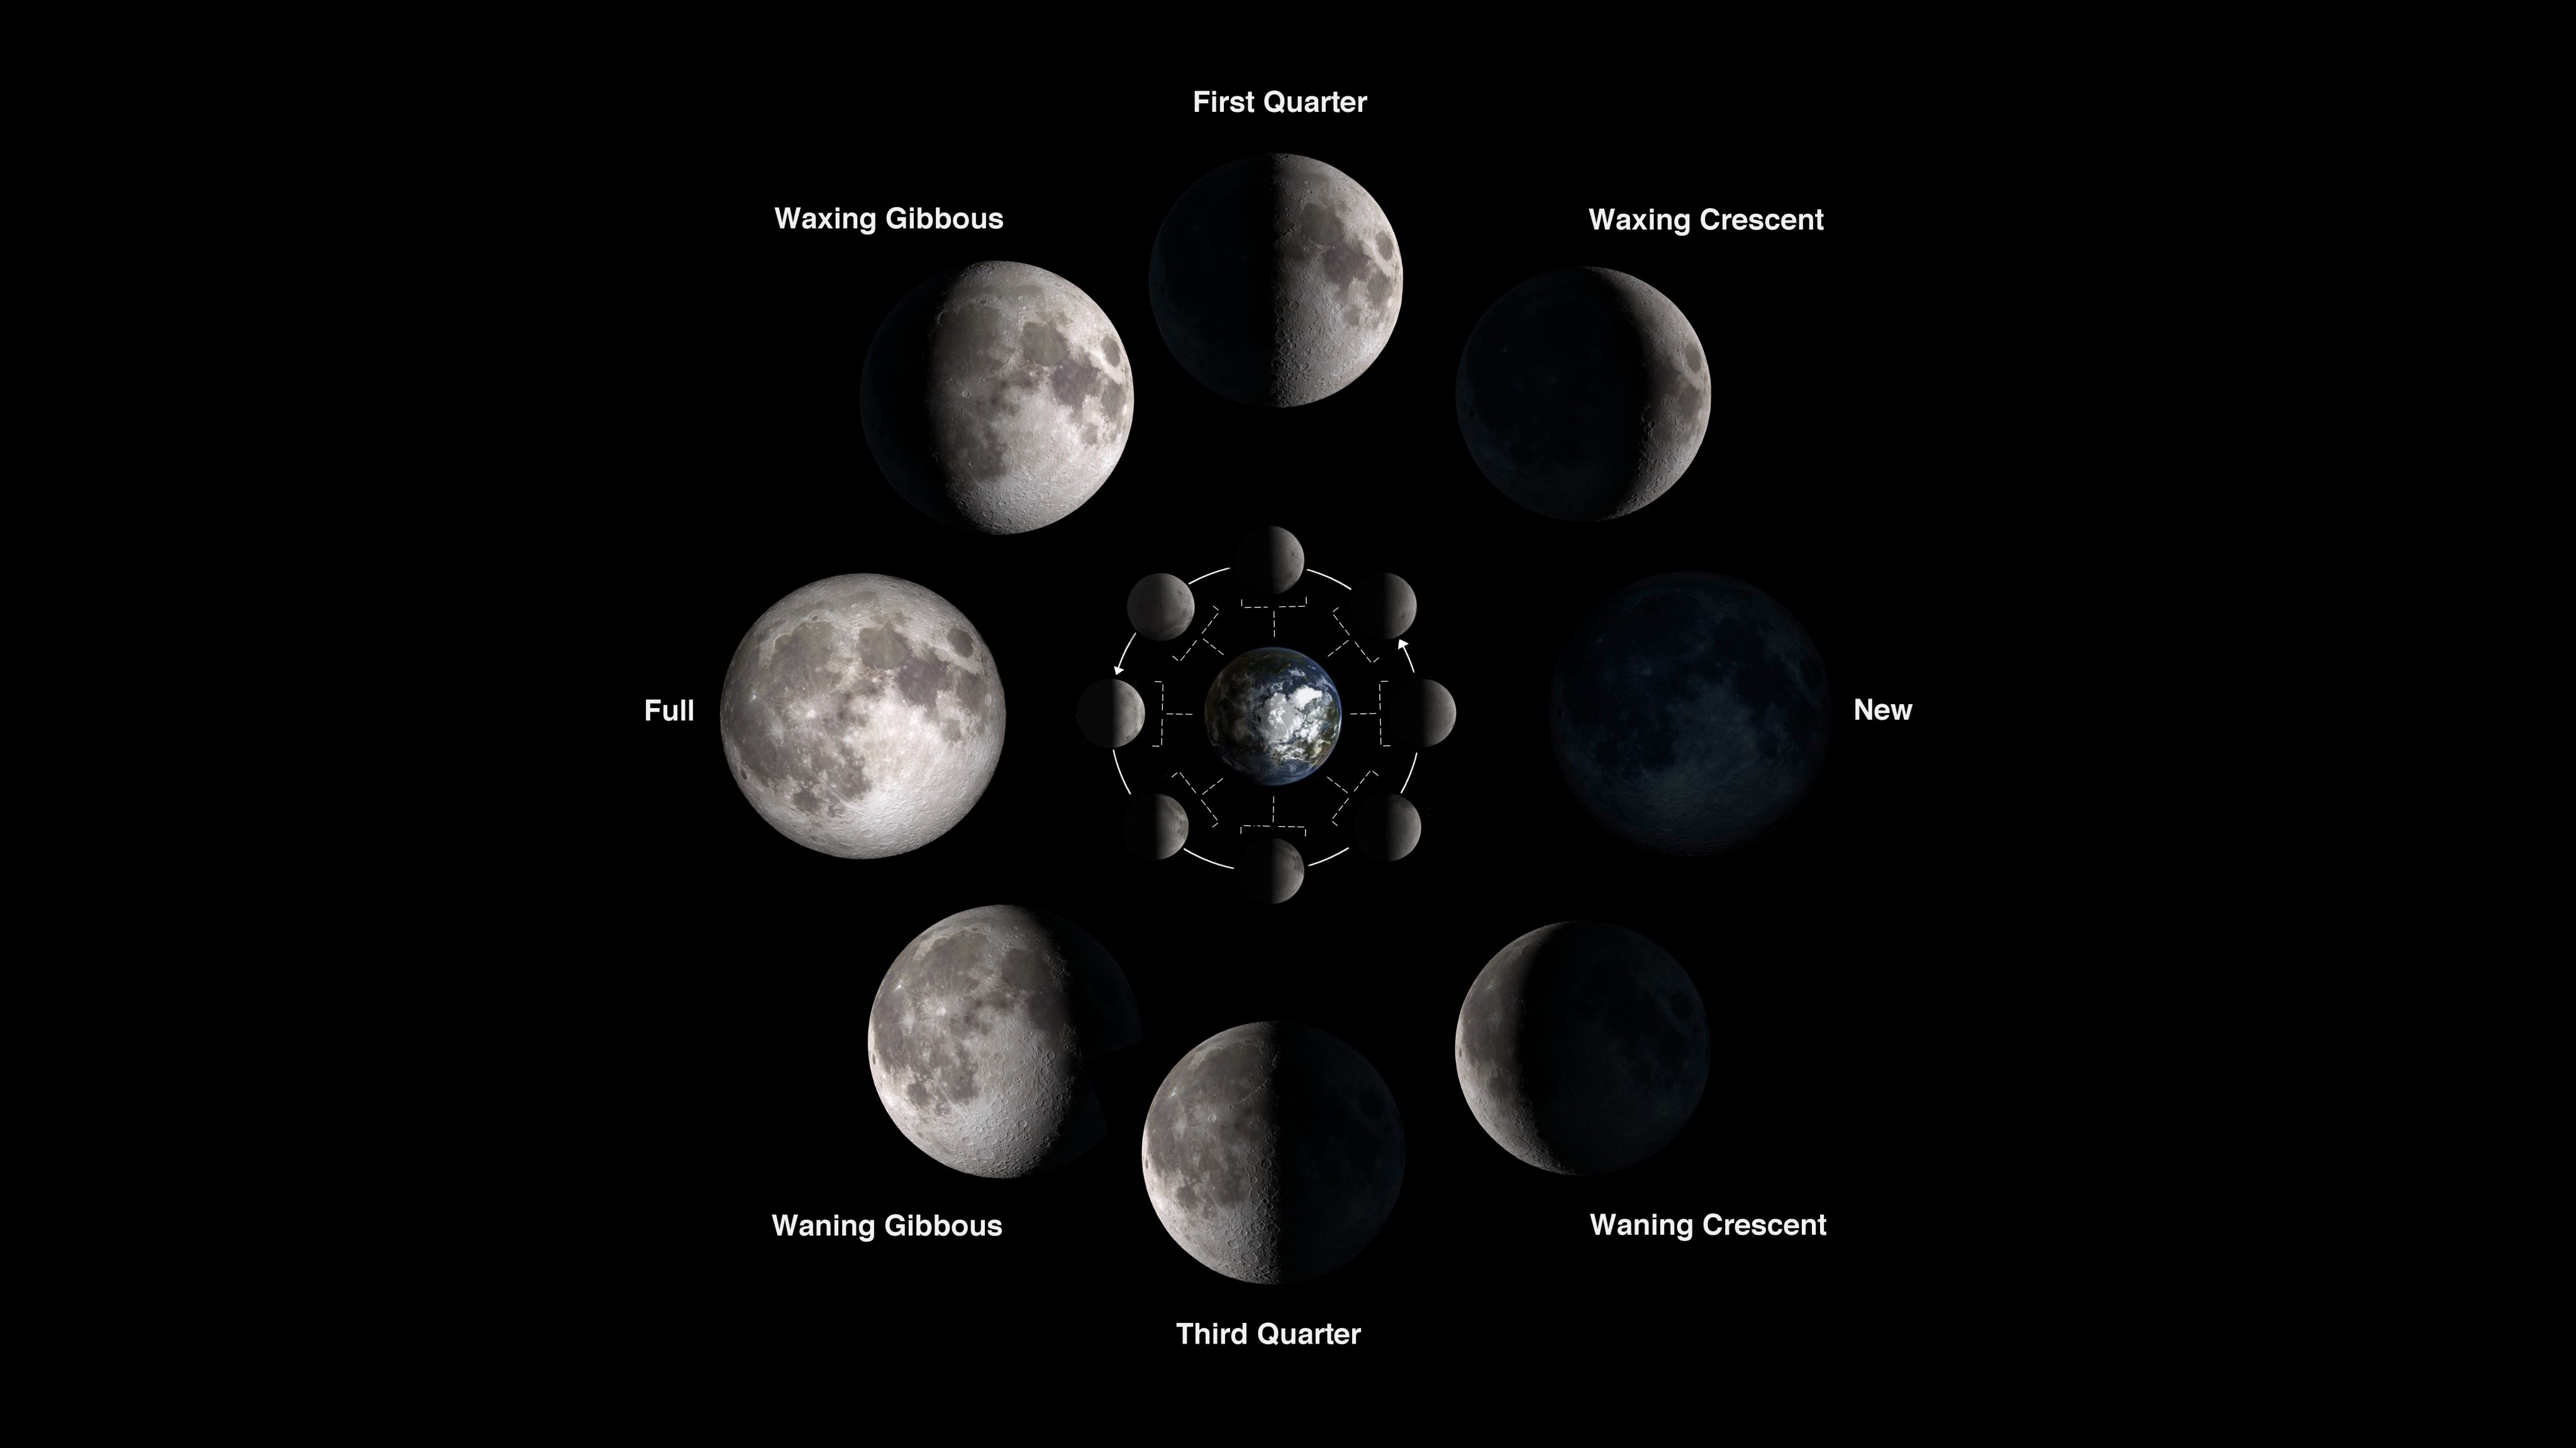 The phases of the Moon, with the full moon at the 9 o'clock position and seven other phases arranged in a circle going clockwise. in the center of the circle is a diagram looking toward Earth's North Pole, with the Moon's position that corresponds to each of the eight lunar phases shown by the circle of Moon phases.